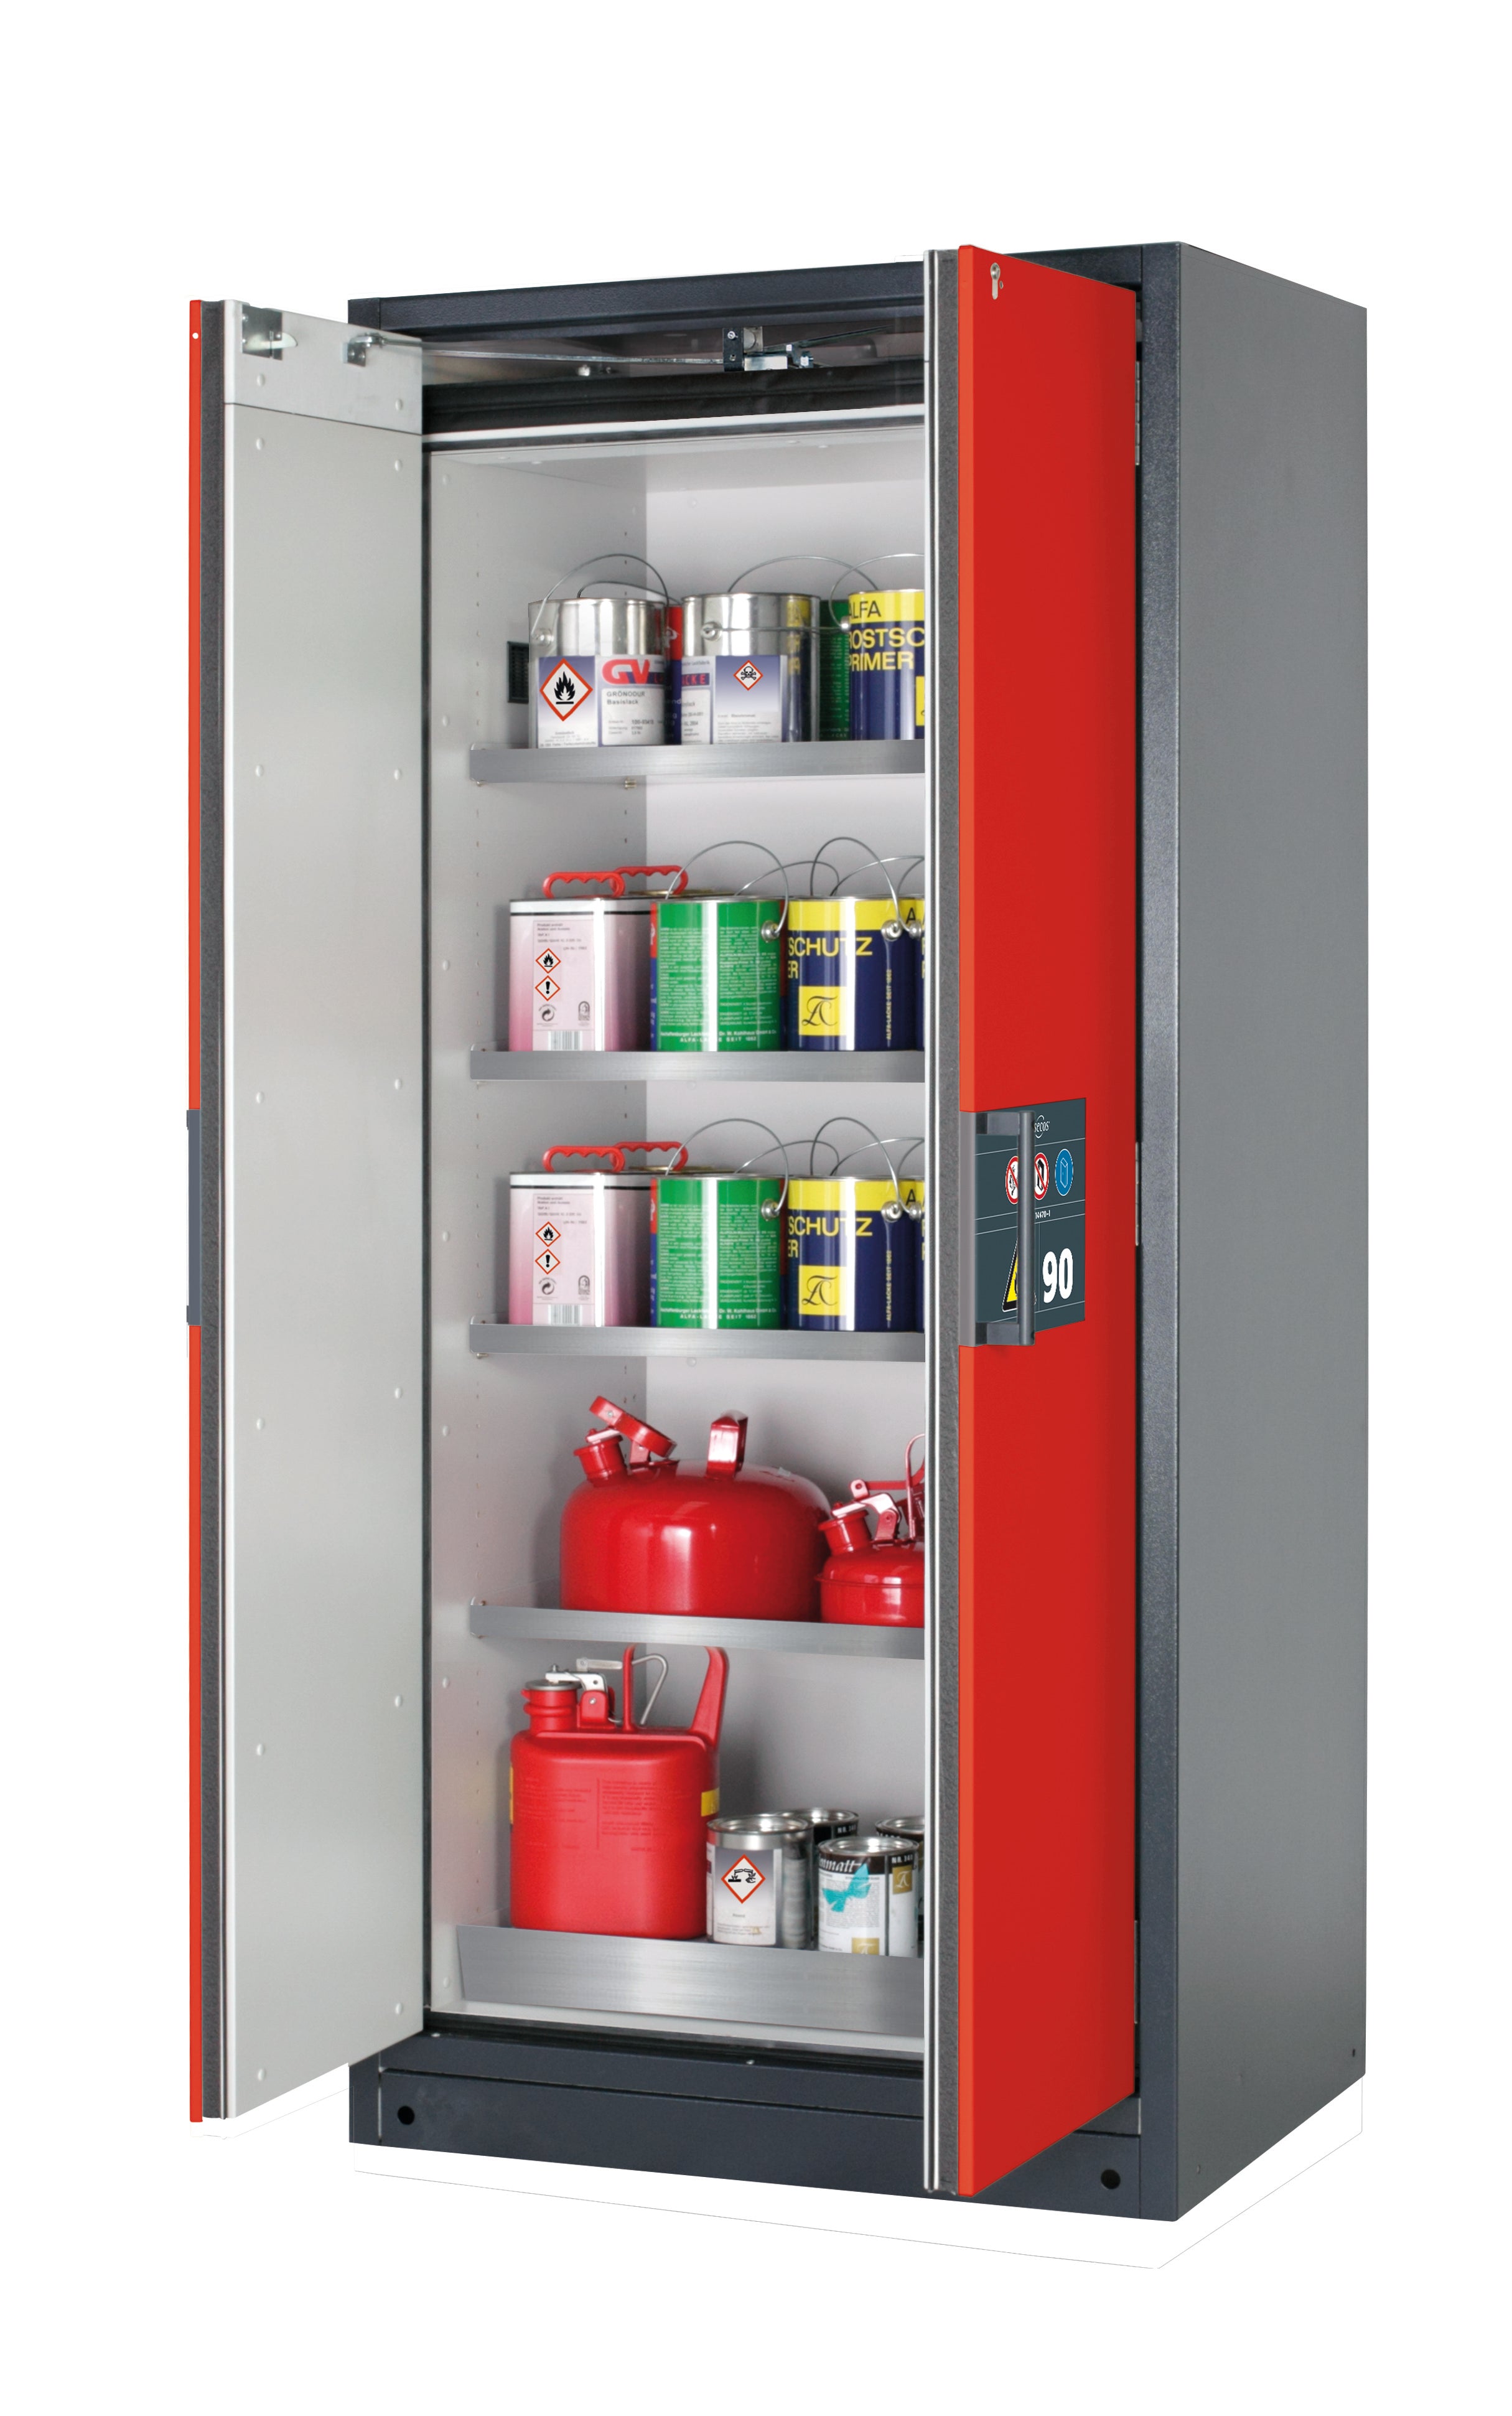 Type 90 safety storage cabinet Q-PEGASUS-90 model Q90.195.090.WDAC in traffic red RAL 3020 with 4x shelf standard (stainless steel 1.4301),